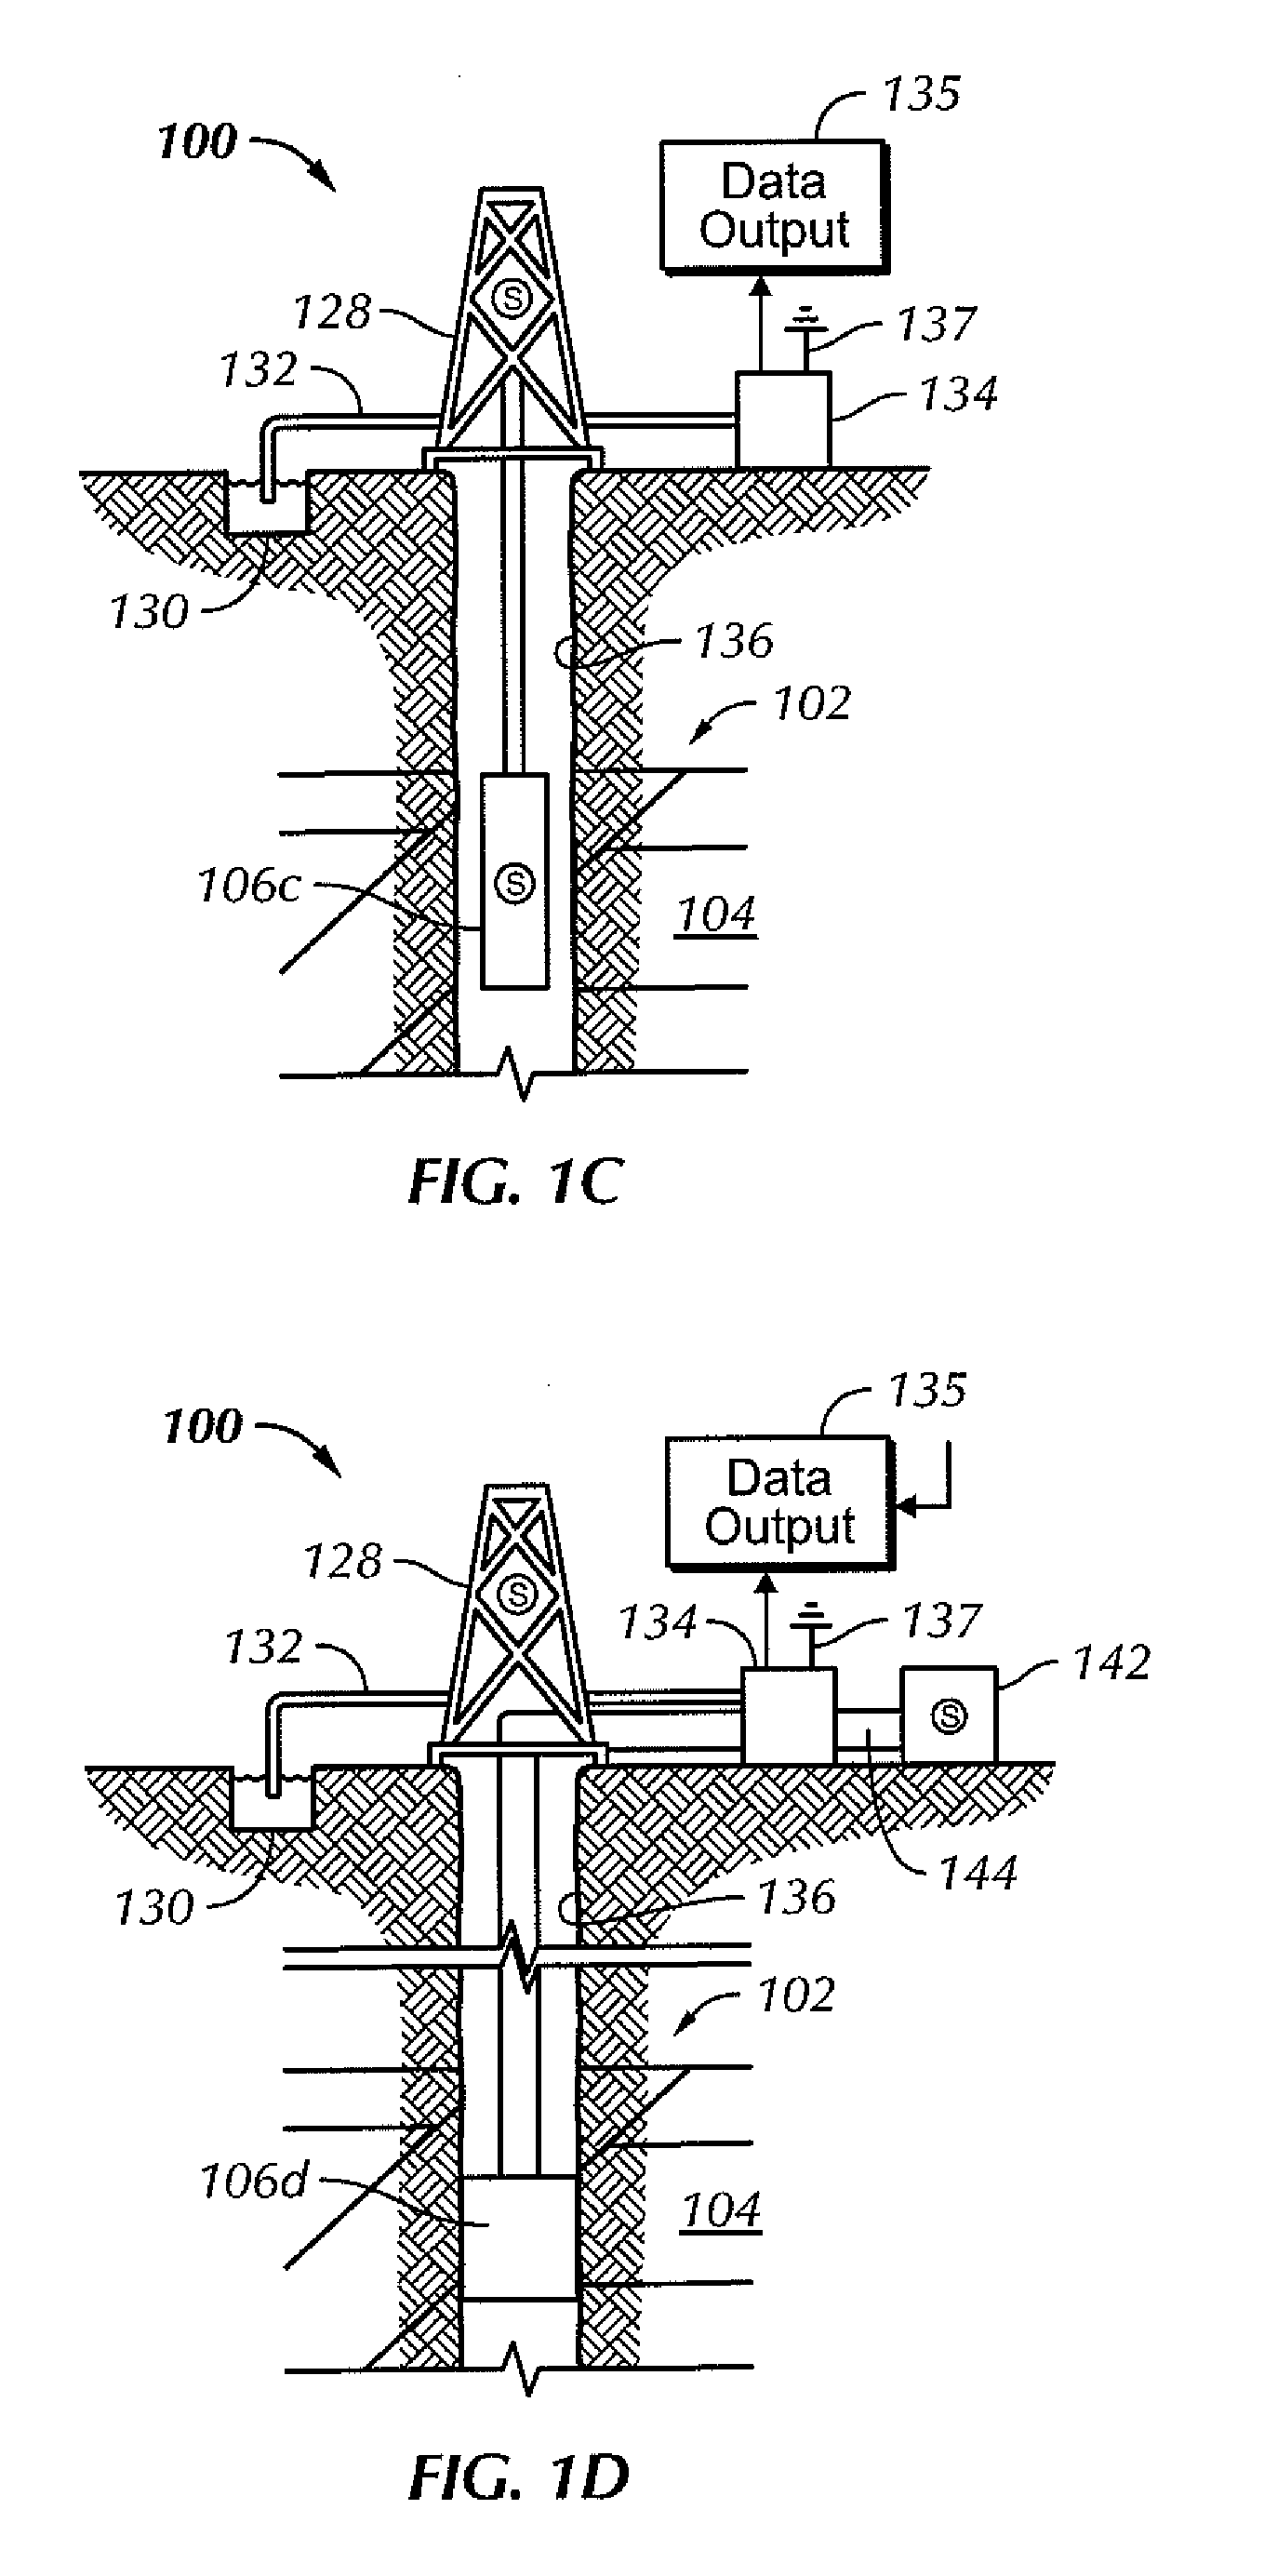 Method of performing integrated oilfield operations